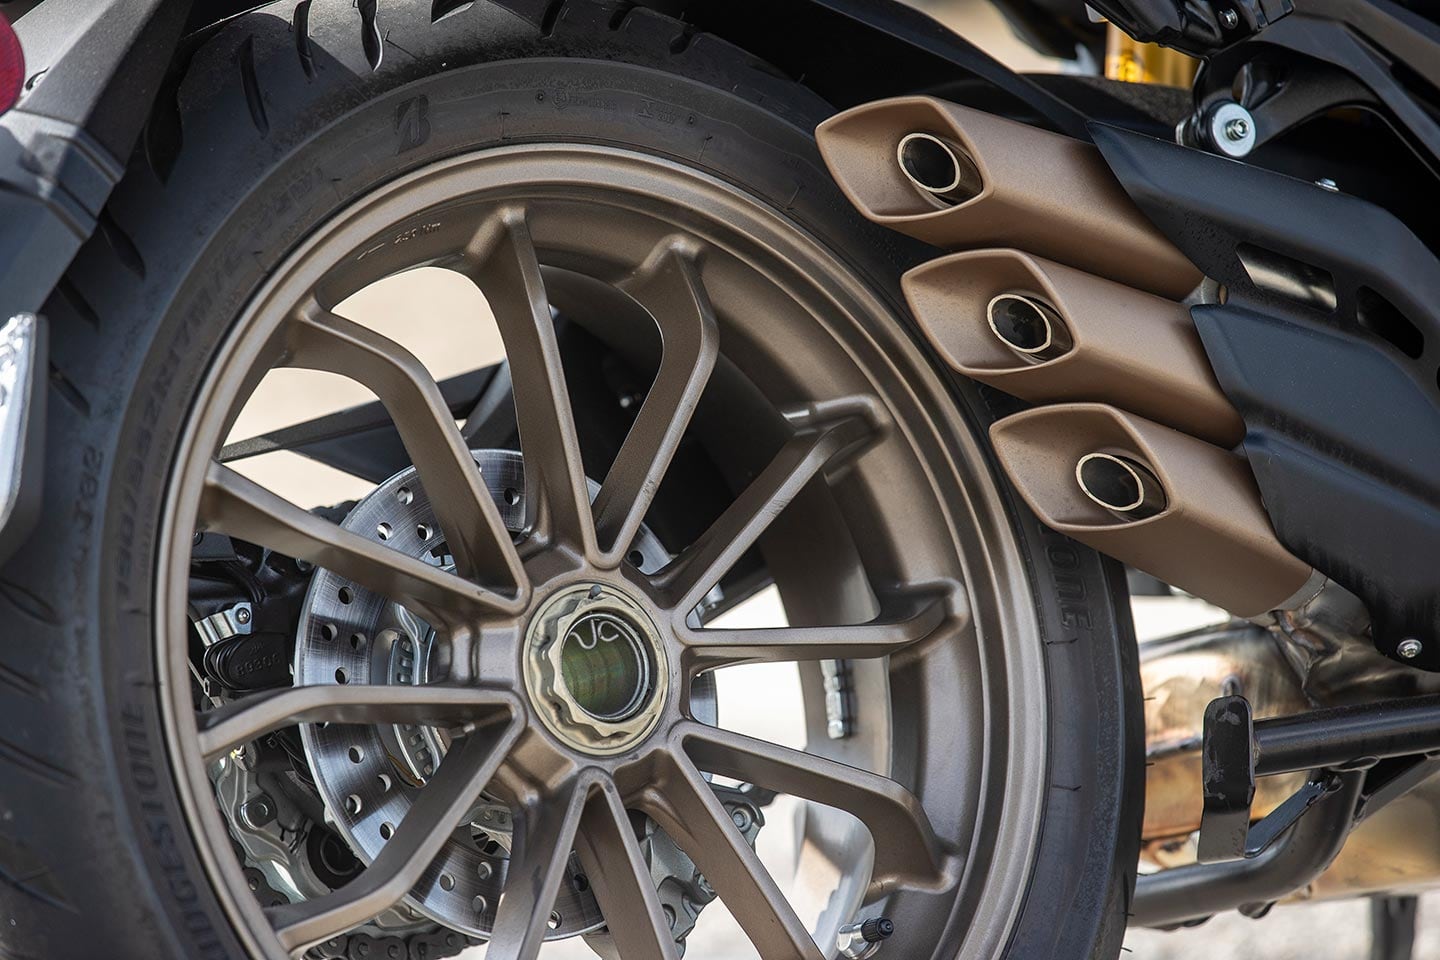 There’s just something about a single-sided swingarm. How about those slash-cut mufflers too? The only thing in this picture we’re not fans of are the Bridgestone Battlax Sport Touring T32 tires, which don’t match the sporty performance of the bike.